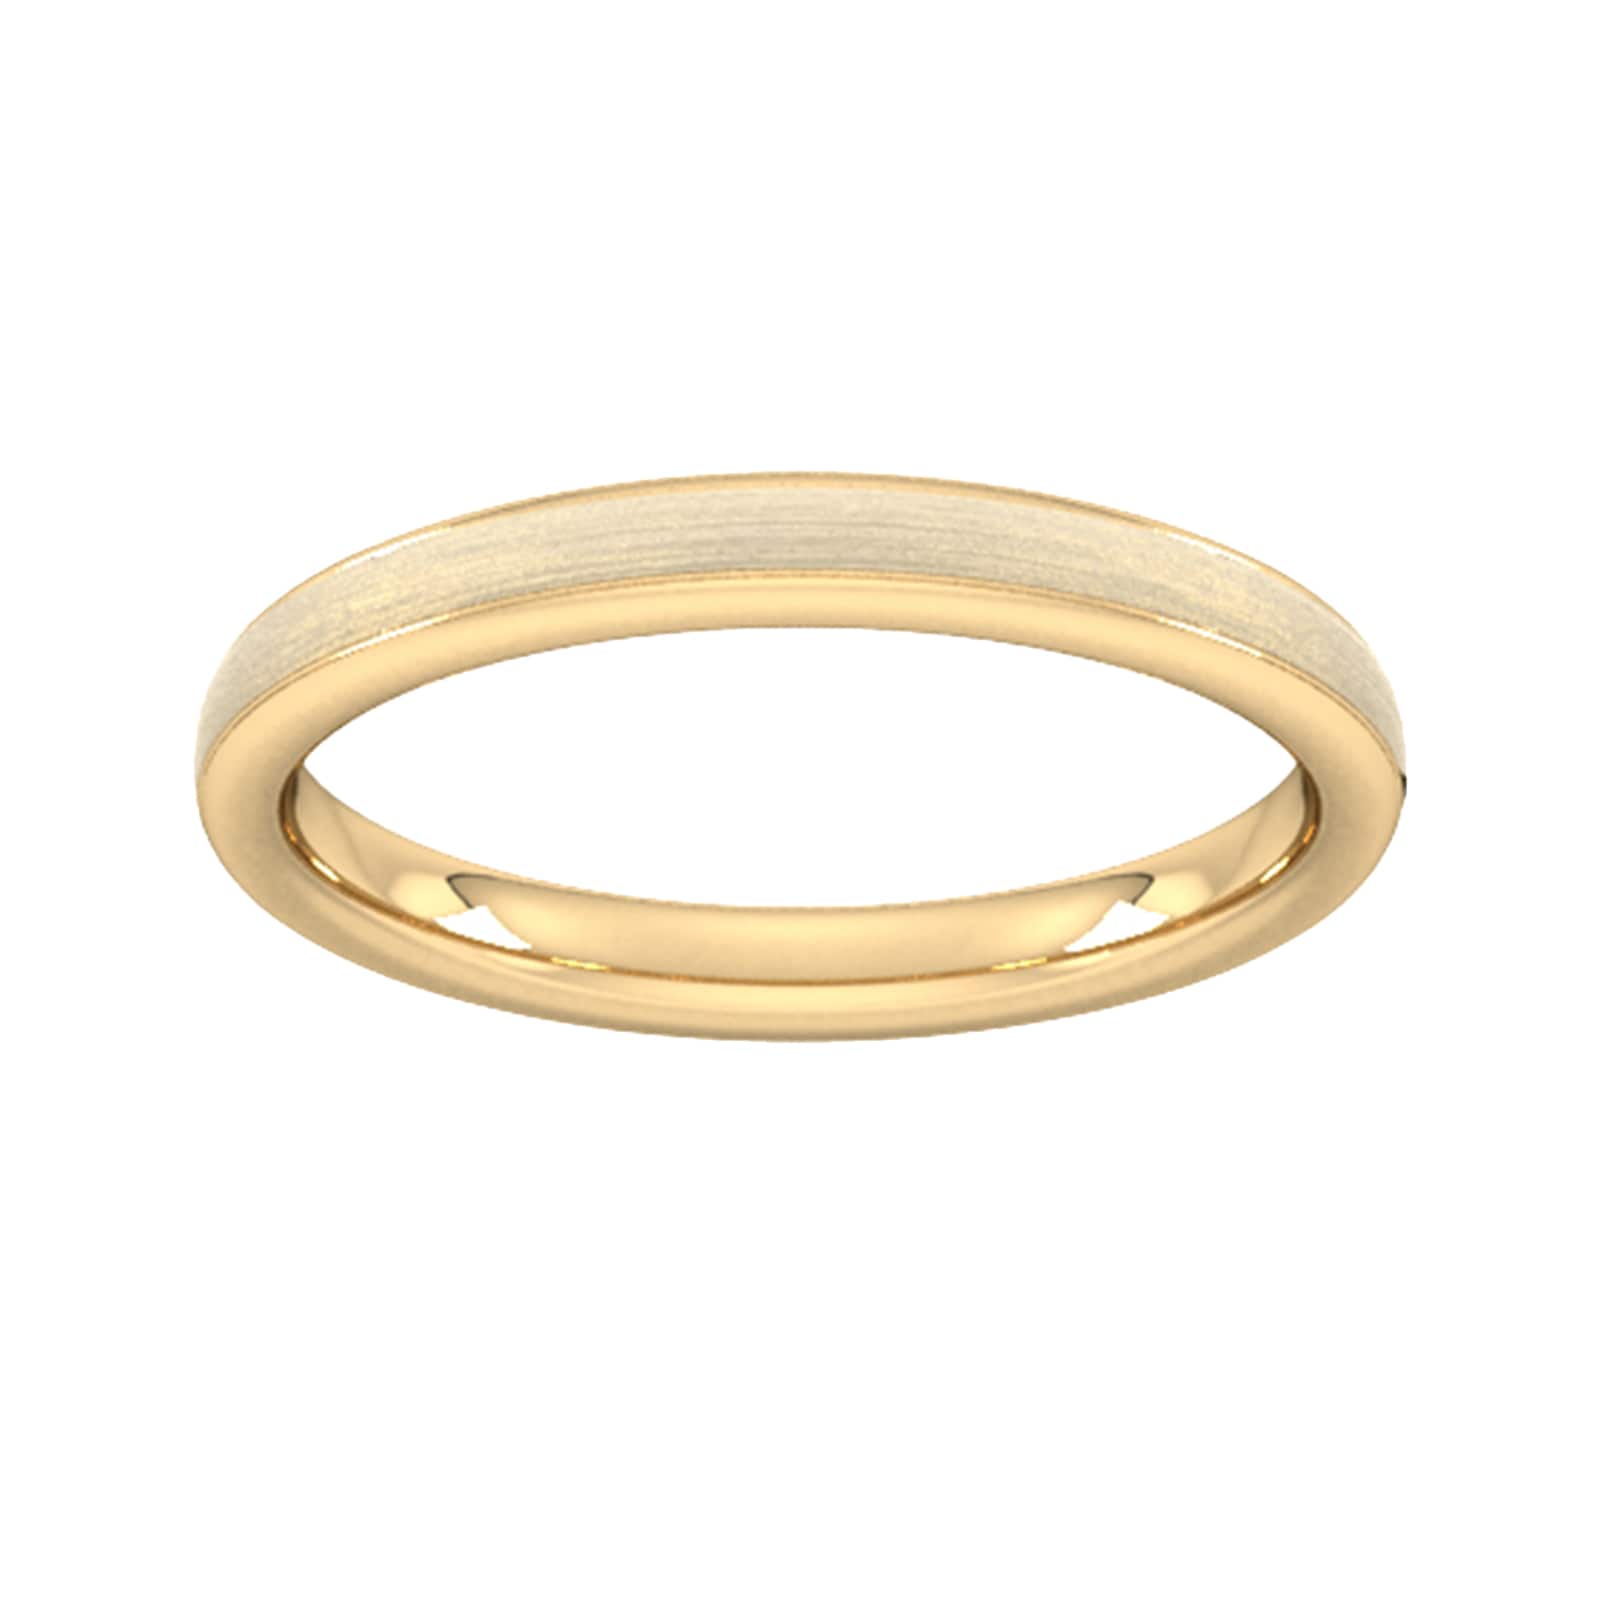 2.5mm D Shape Heavy Matt Centre With Grooves Wedding Ring In 9 Carat Yellow Gold - Ring Size U